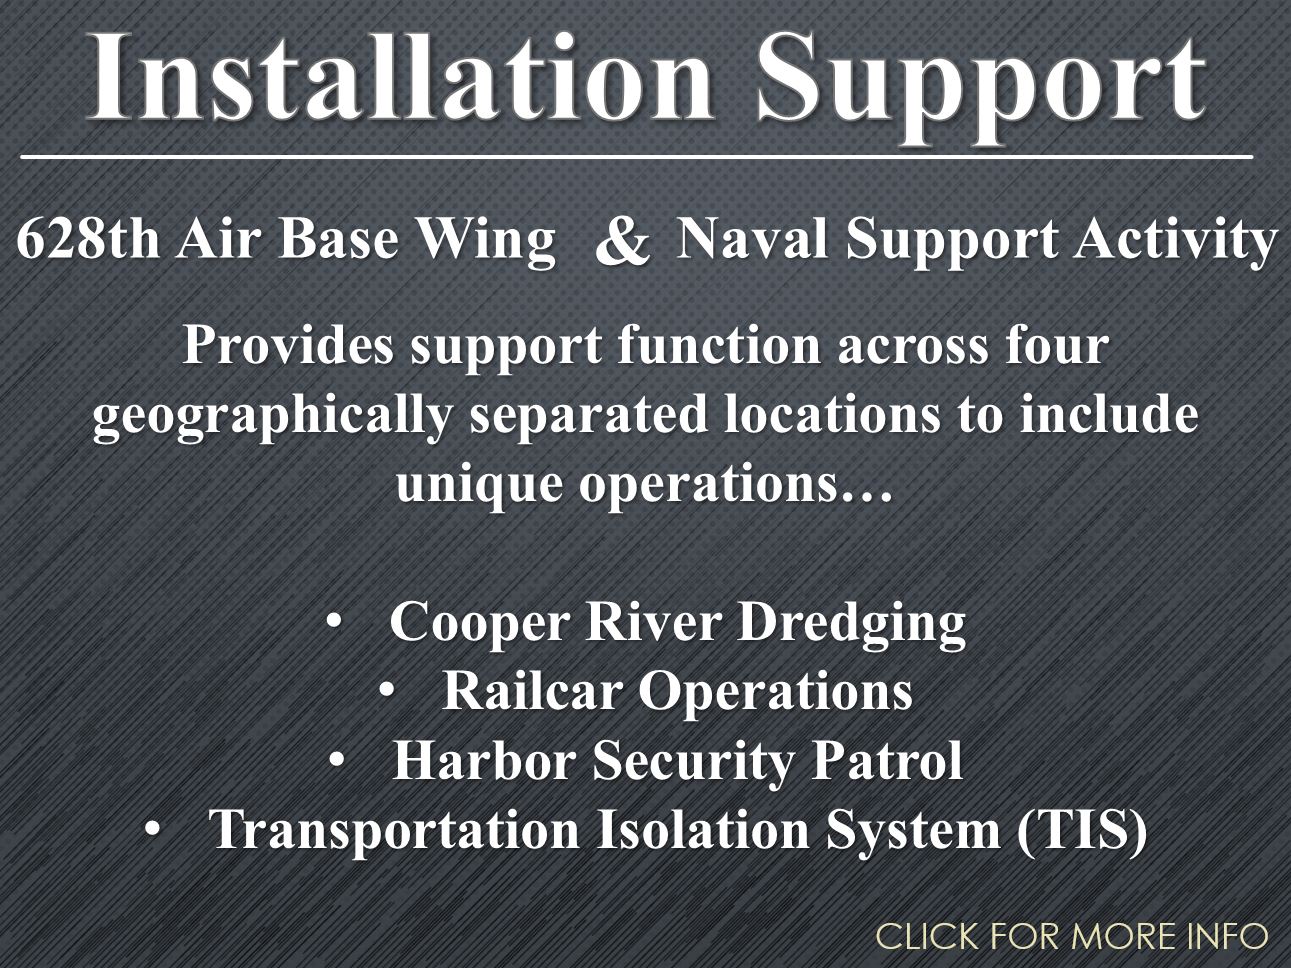 An infographic for Installation Support